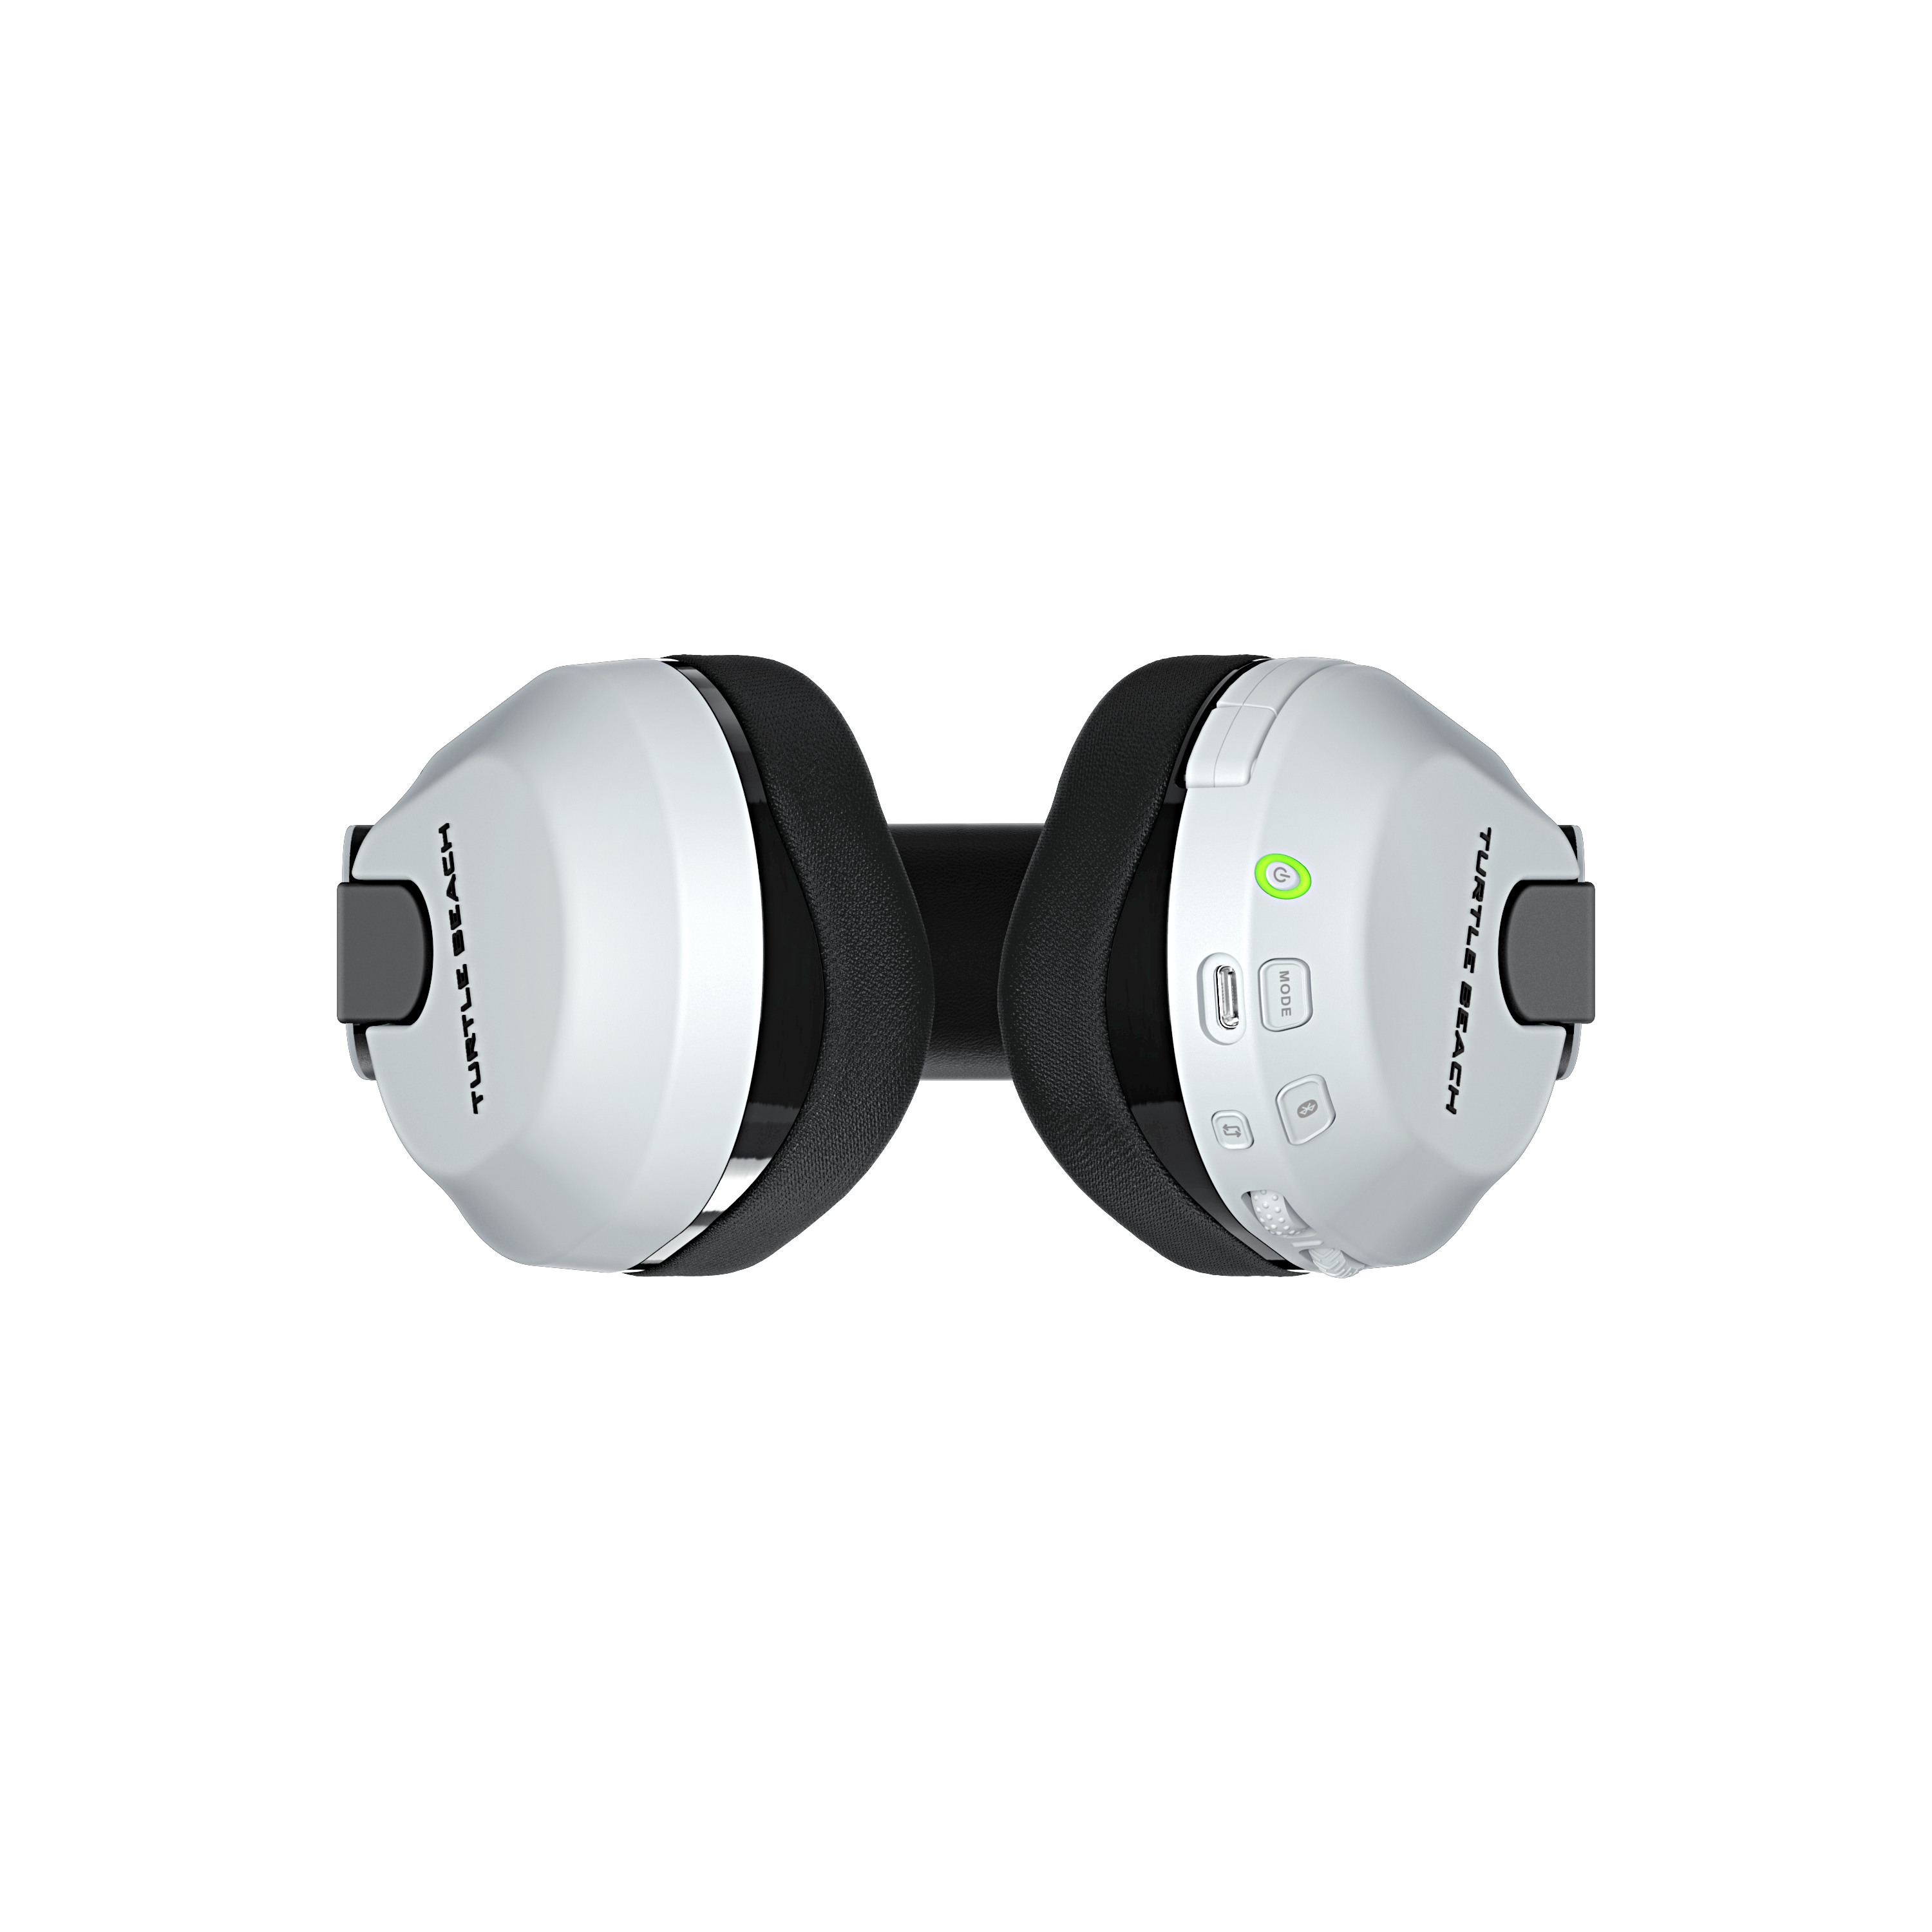 TURTLE BEACH Stealth 600 GEN3, White TBS-3102-15 Wireless Headset for PS5